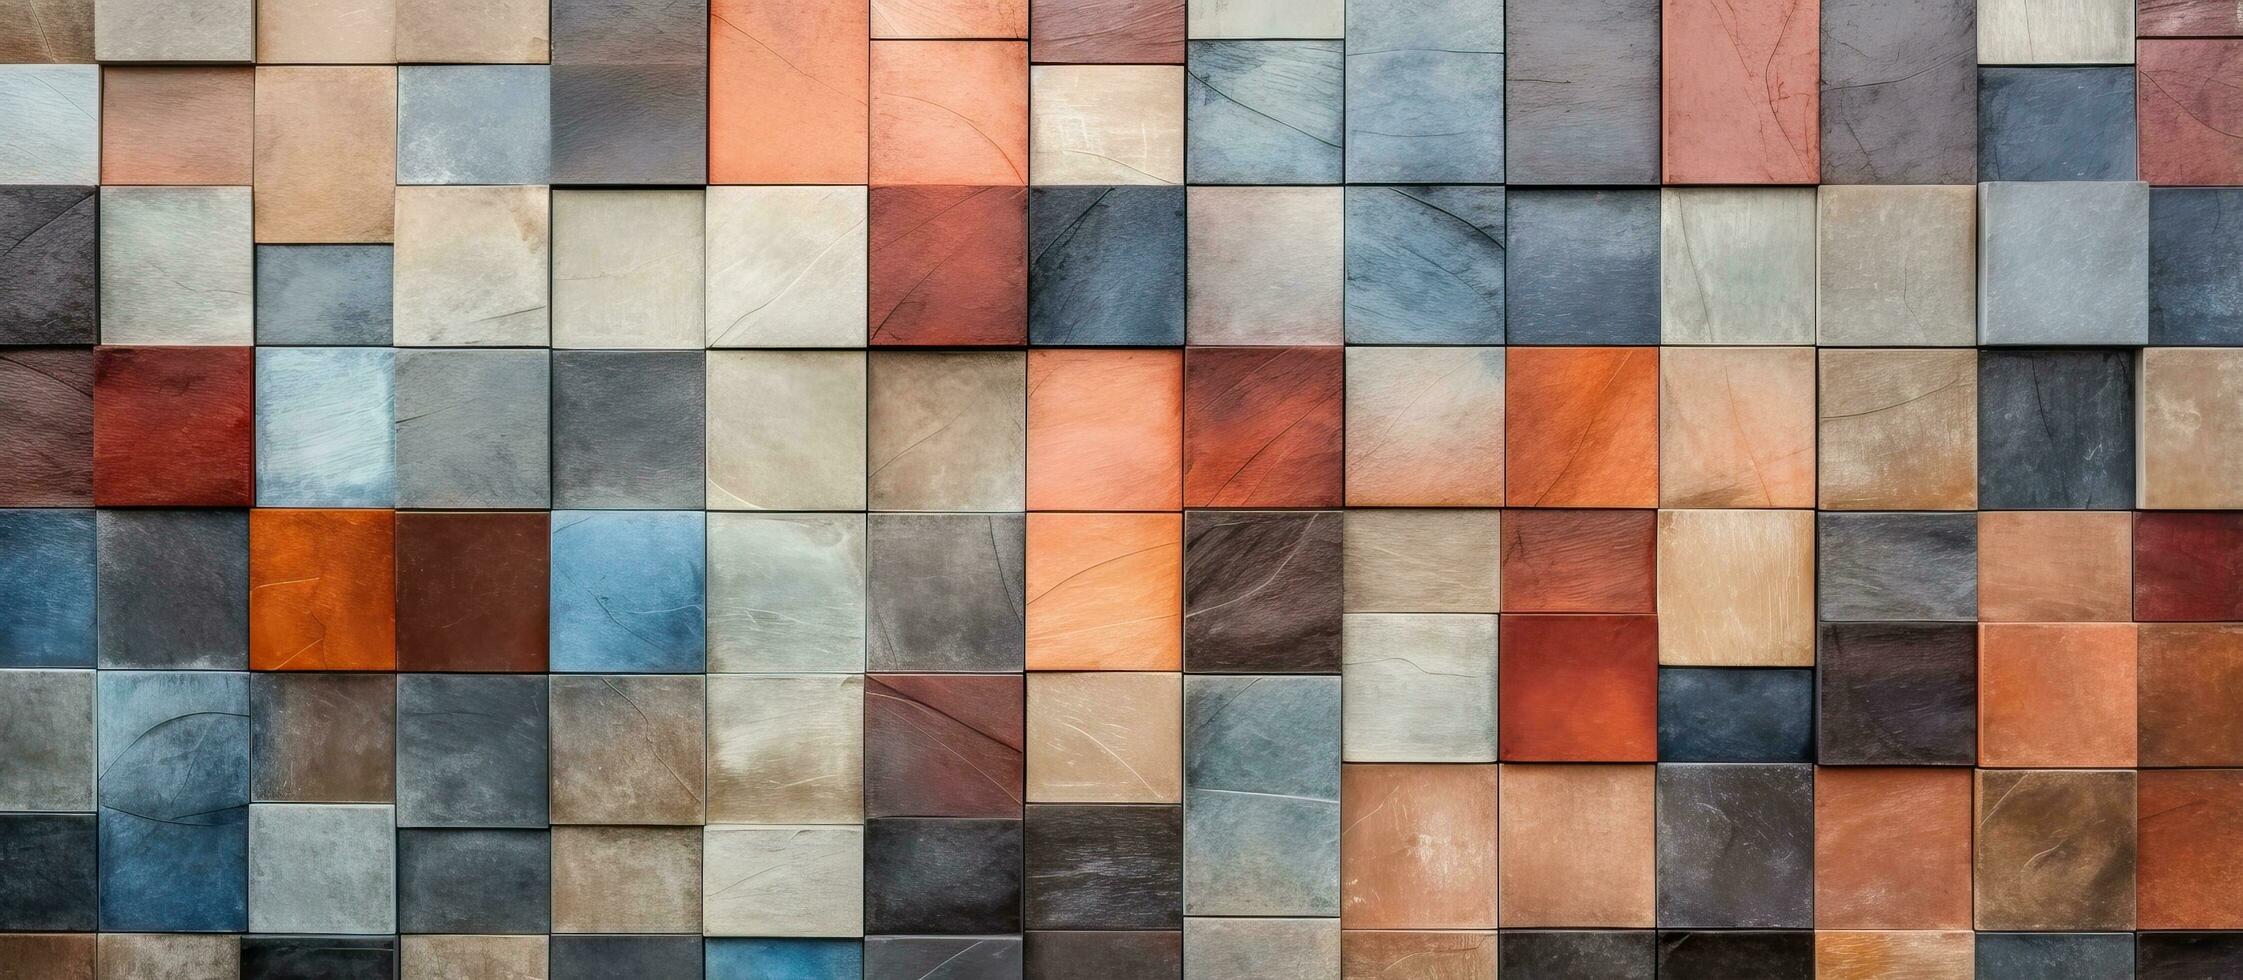 Abstract home decor design for interior using multicolor ceramic wall tiles as a textured background photo